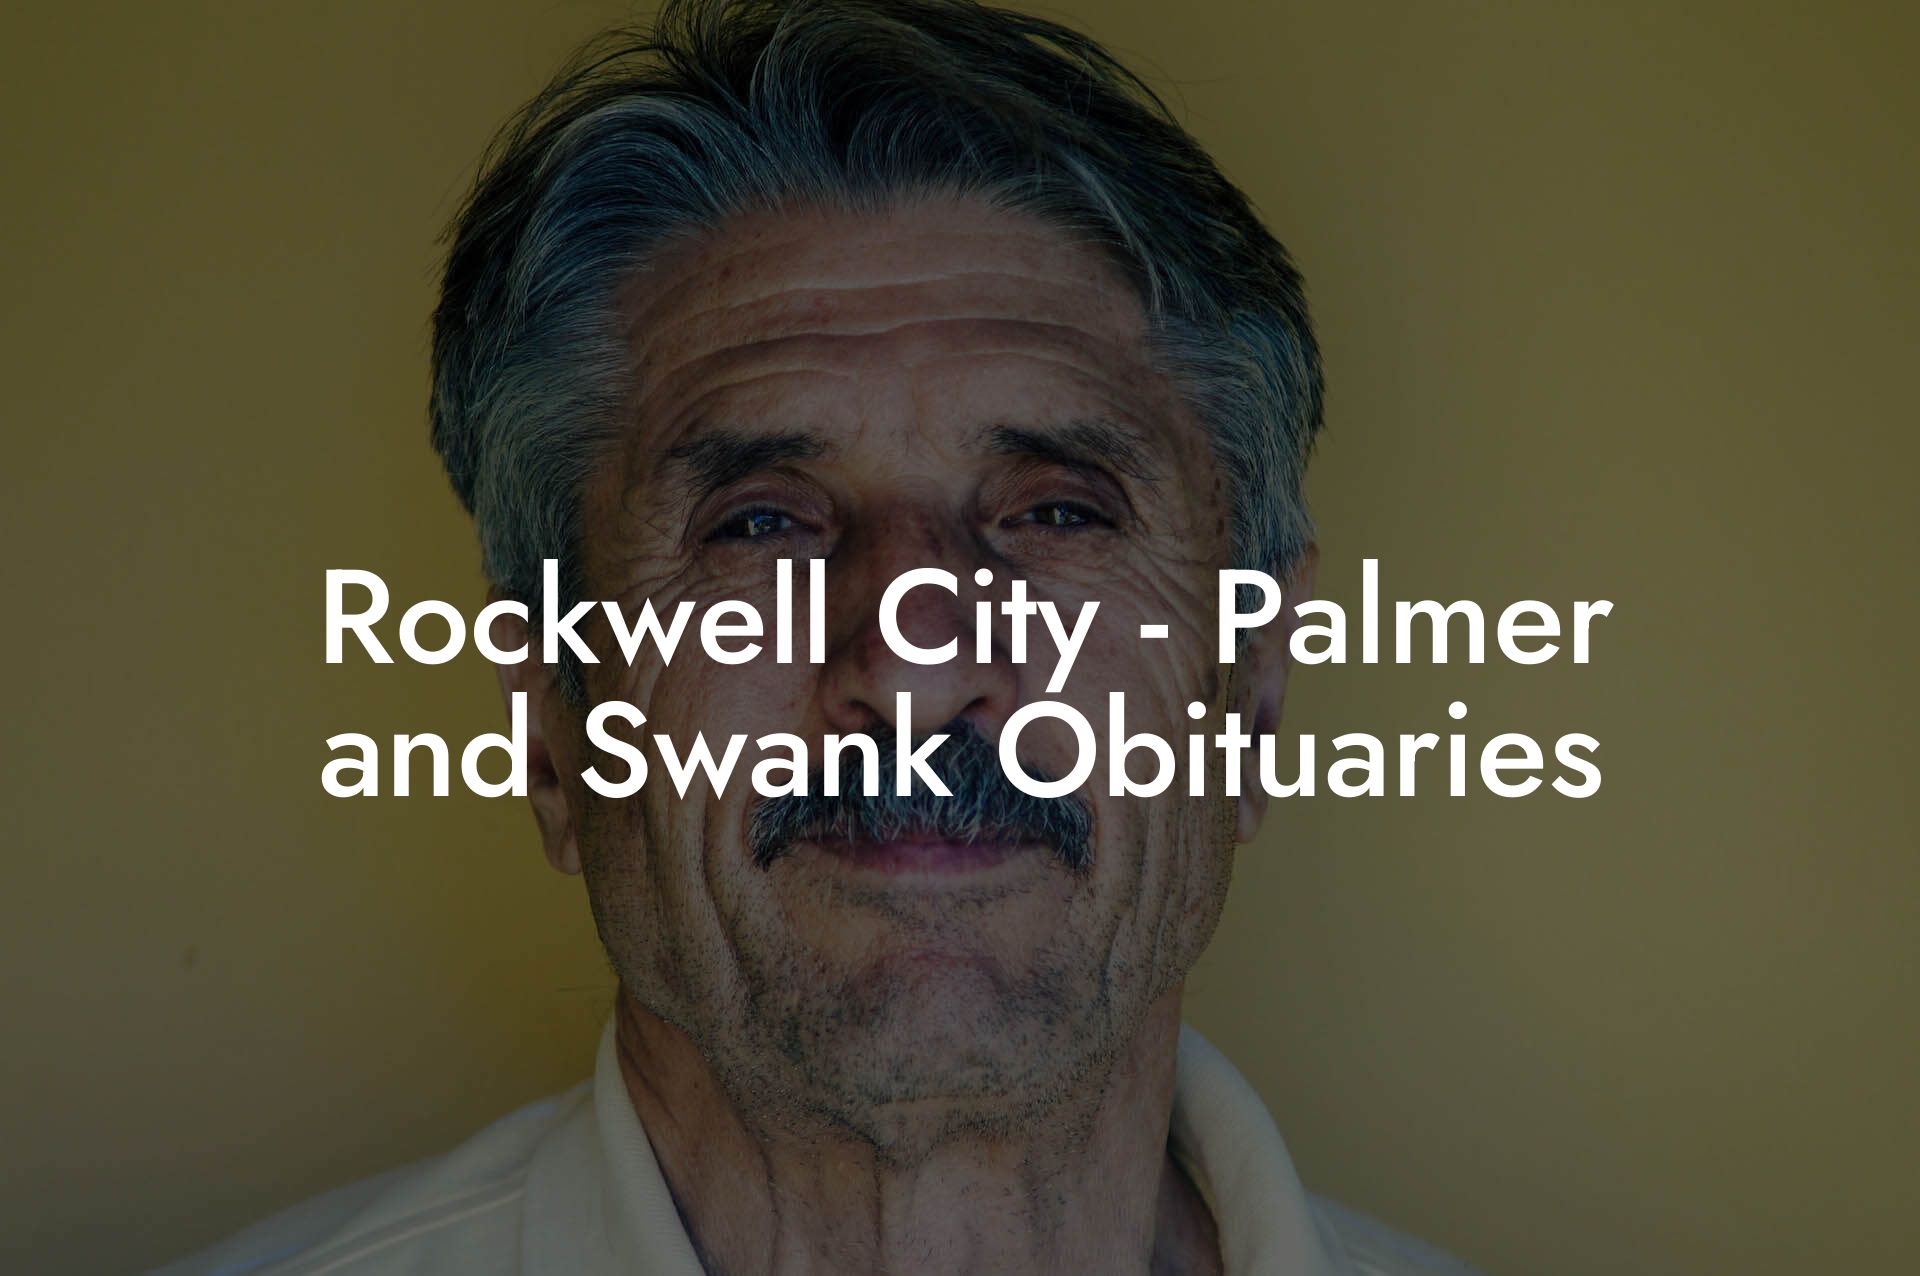 Rockwell City - Palmer and Swank Obituaries